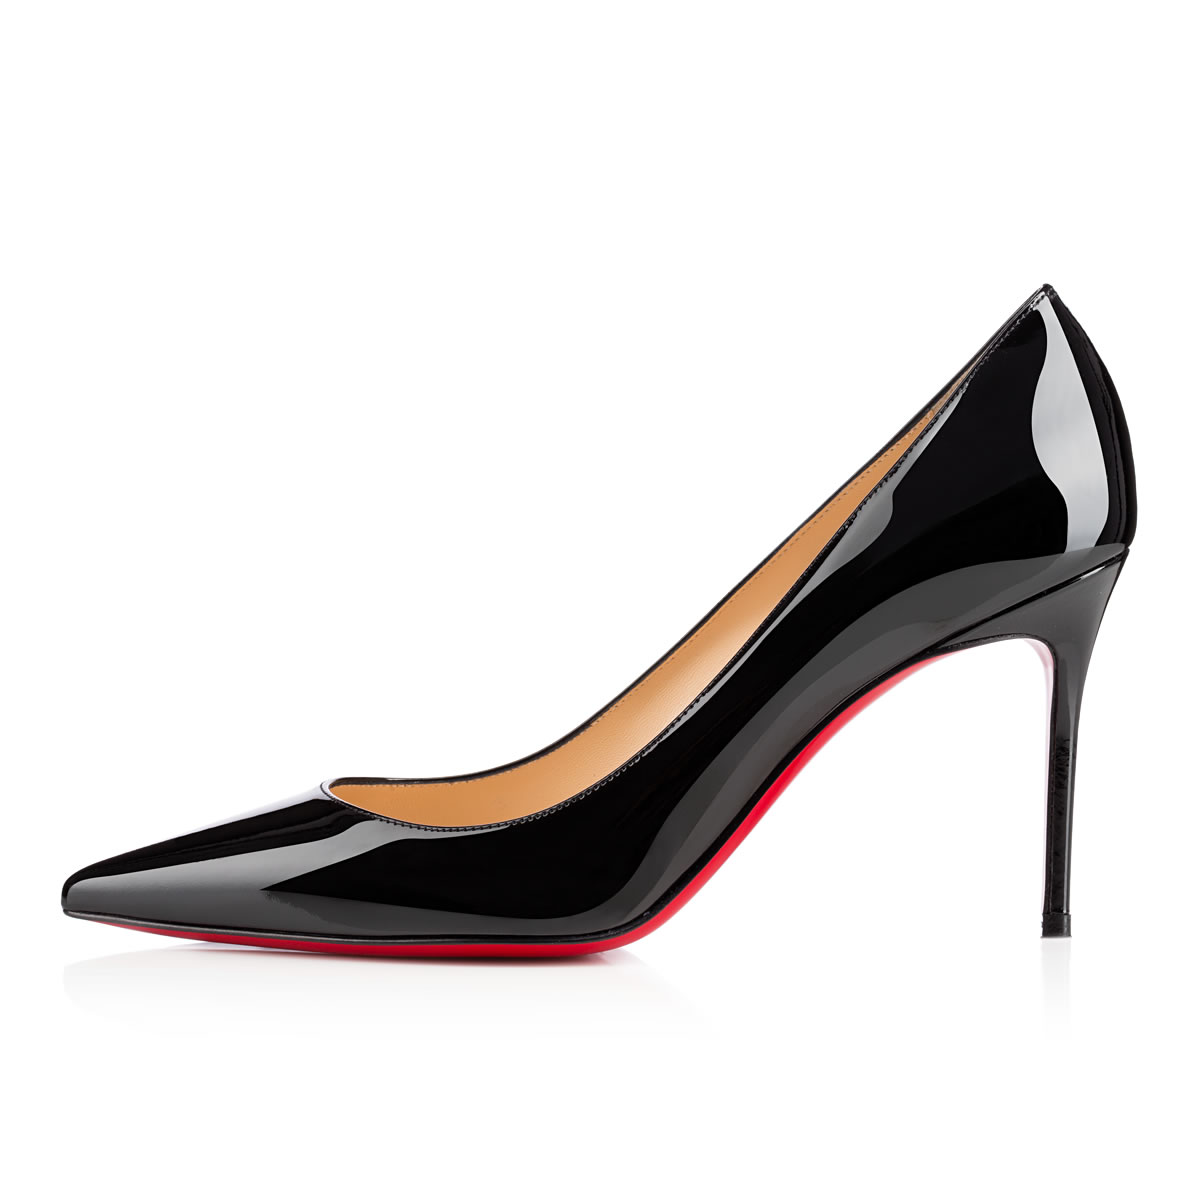 Christian Louboutin - Black And Nude Decollete